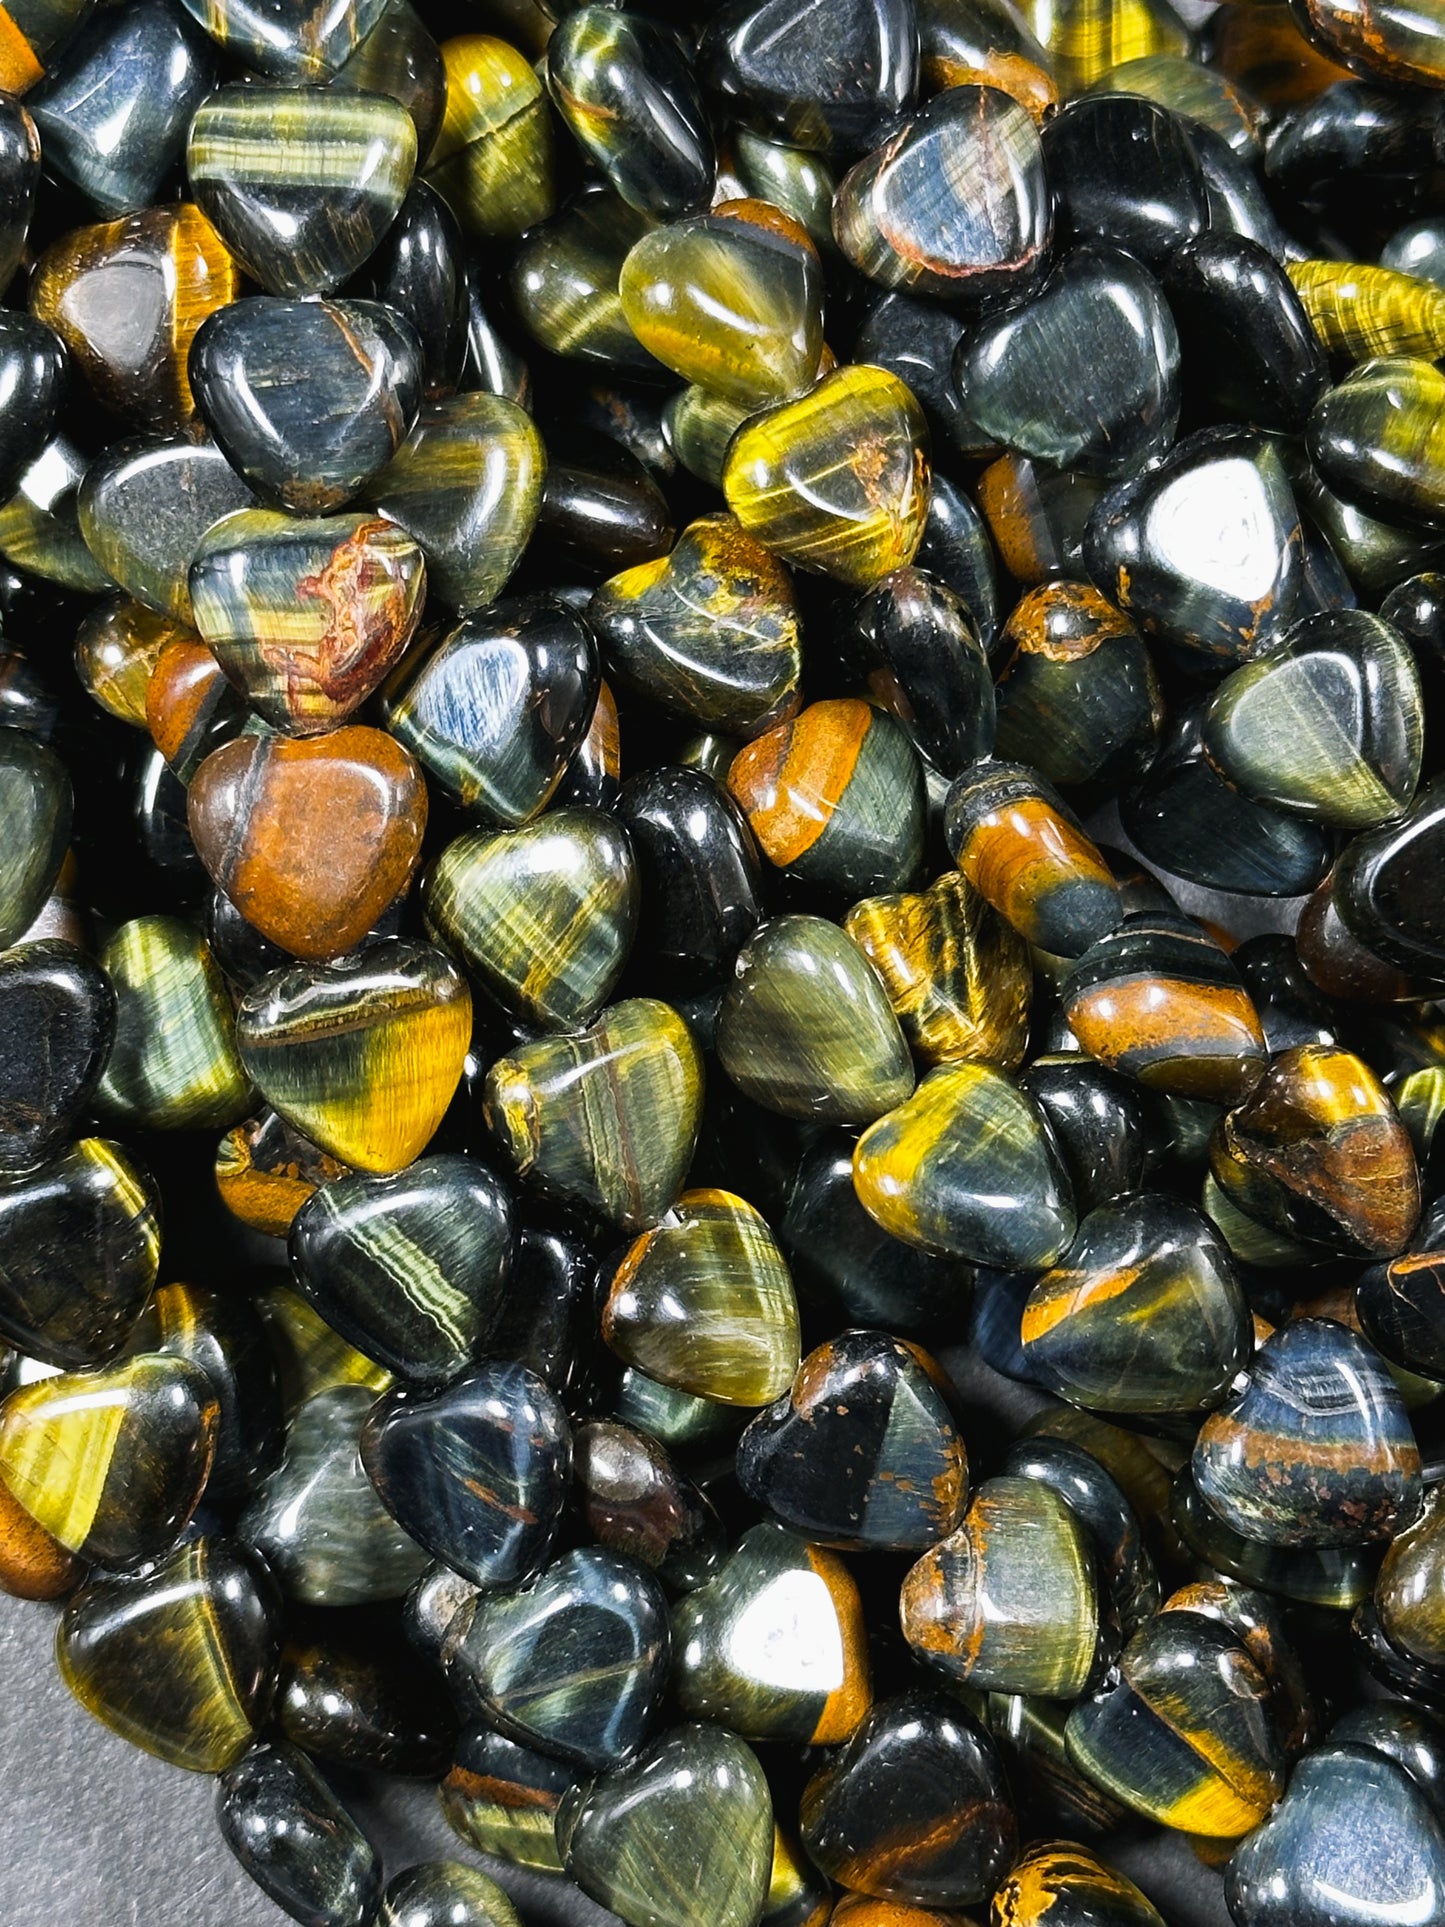 Natural Tiger Eye Gemstone Bead 10mm Heart Shape Bead, Beautiful Navy Blue Brown Color Tiger Eye Bead, Excellent Quality Full Strand 15.5"